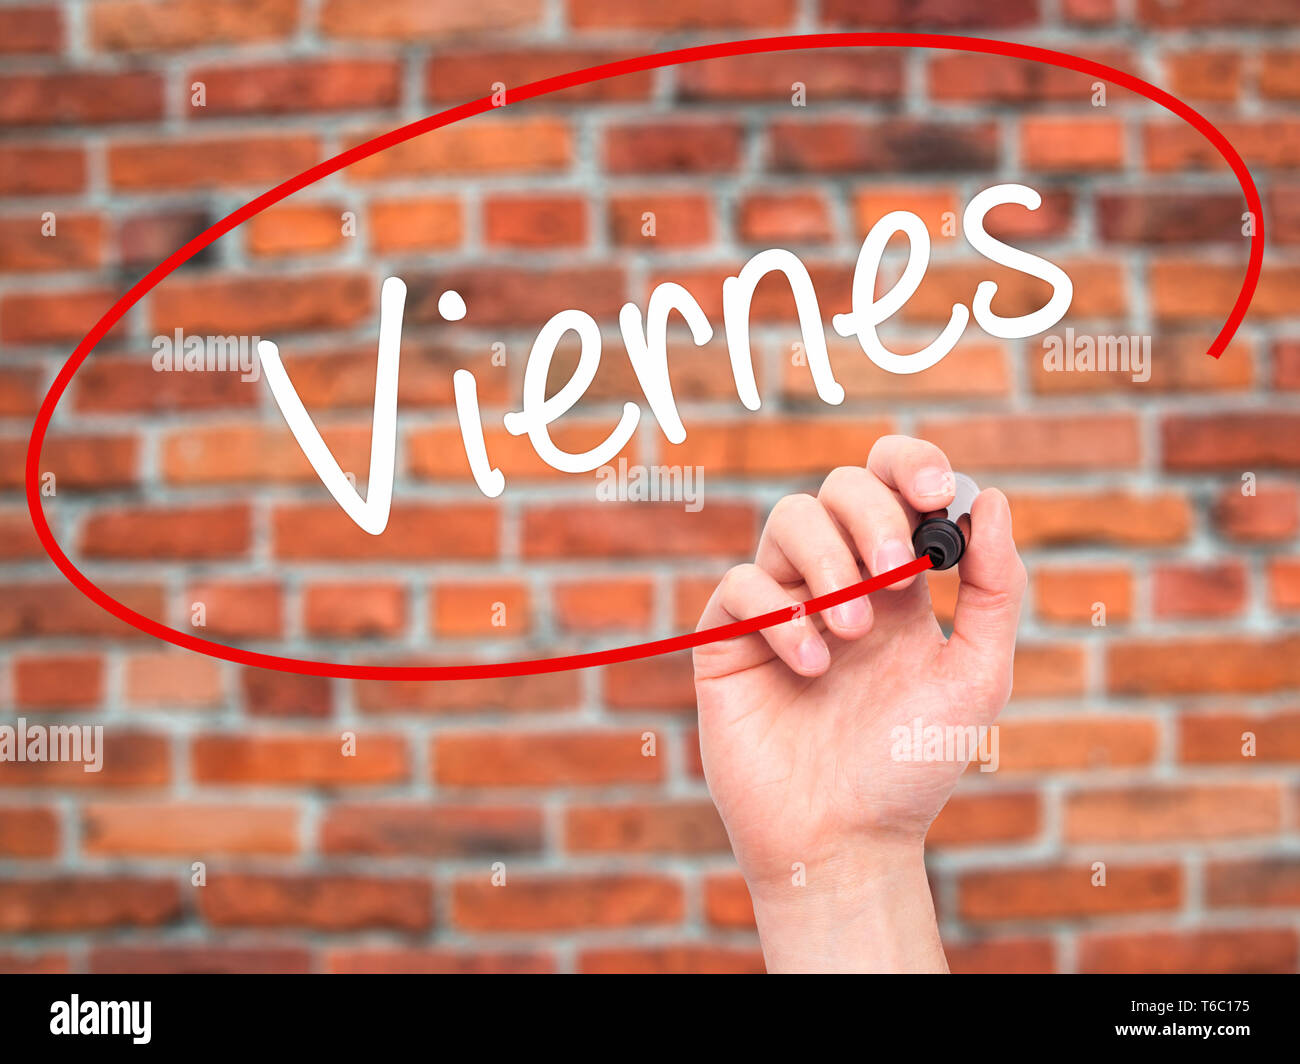 Man Hand writing Viernes (Friday in Spanish) with black marker on visual screen Stock Photo